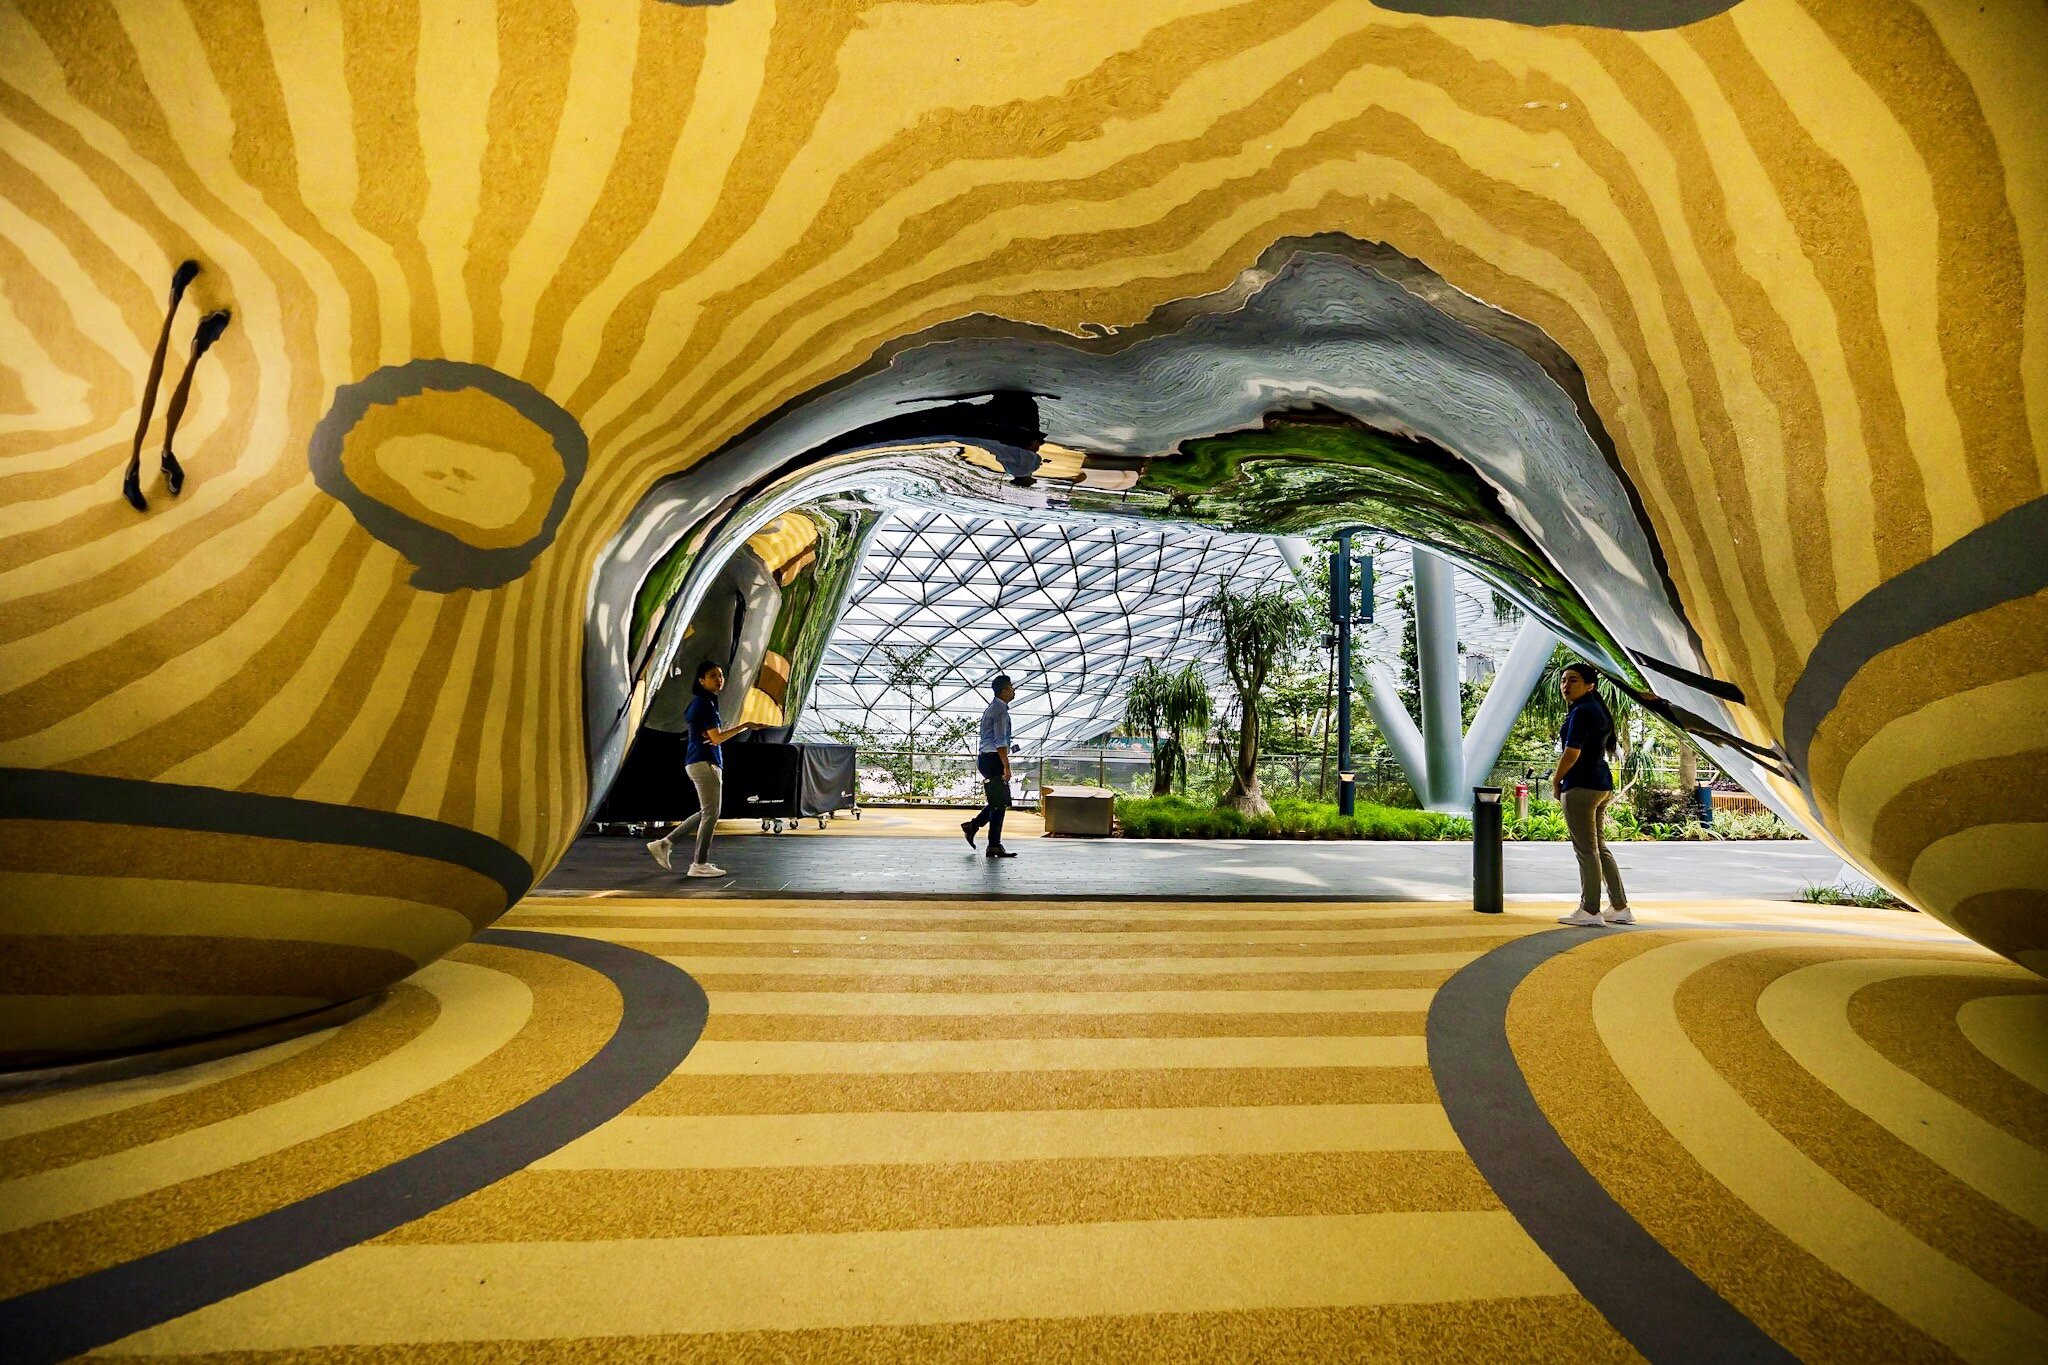 the-underbelly-of-the-discovery-slides-at-the-canopy-park-in-jewel-changi-airport-its-a-work-of-art_t20_Ozp7lE.jpg